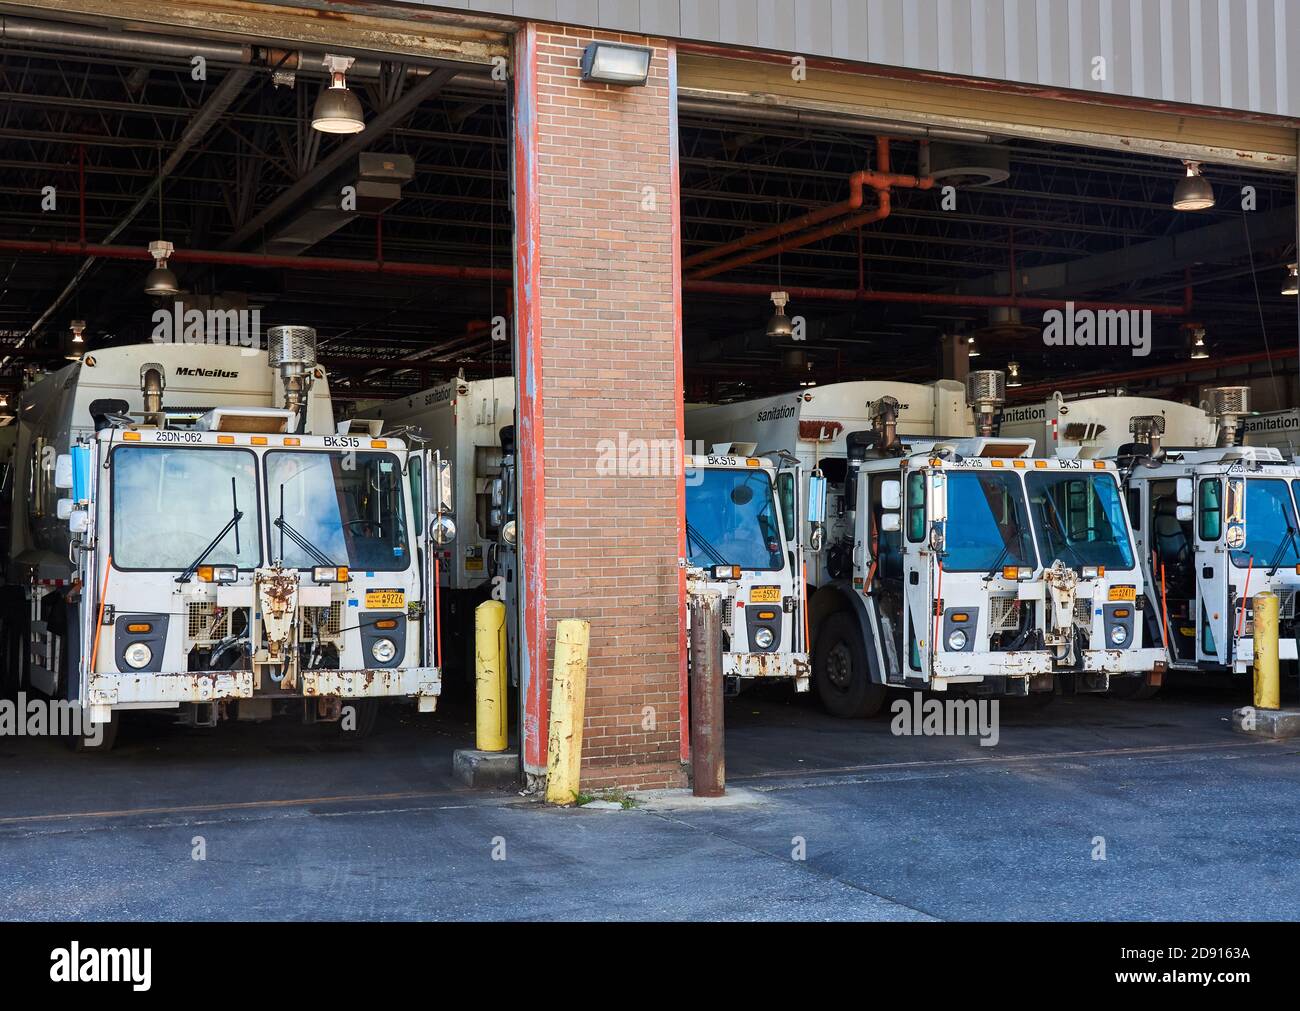 These sanitation Department garbage trucks are stored in a garage in Sunset Park, Brooklyn, NY, while not in use. Stock Photo